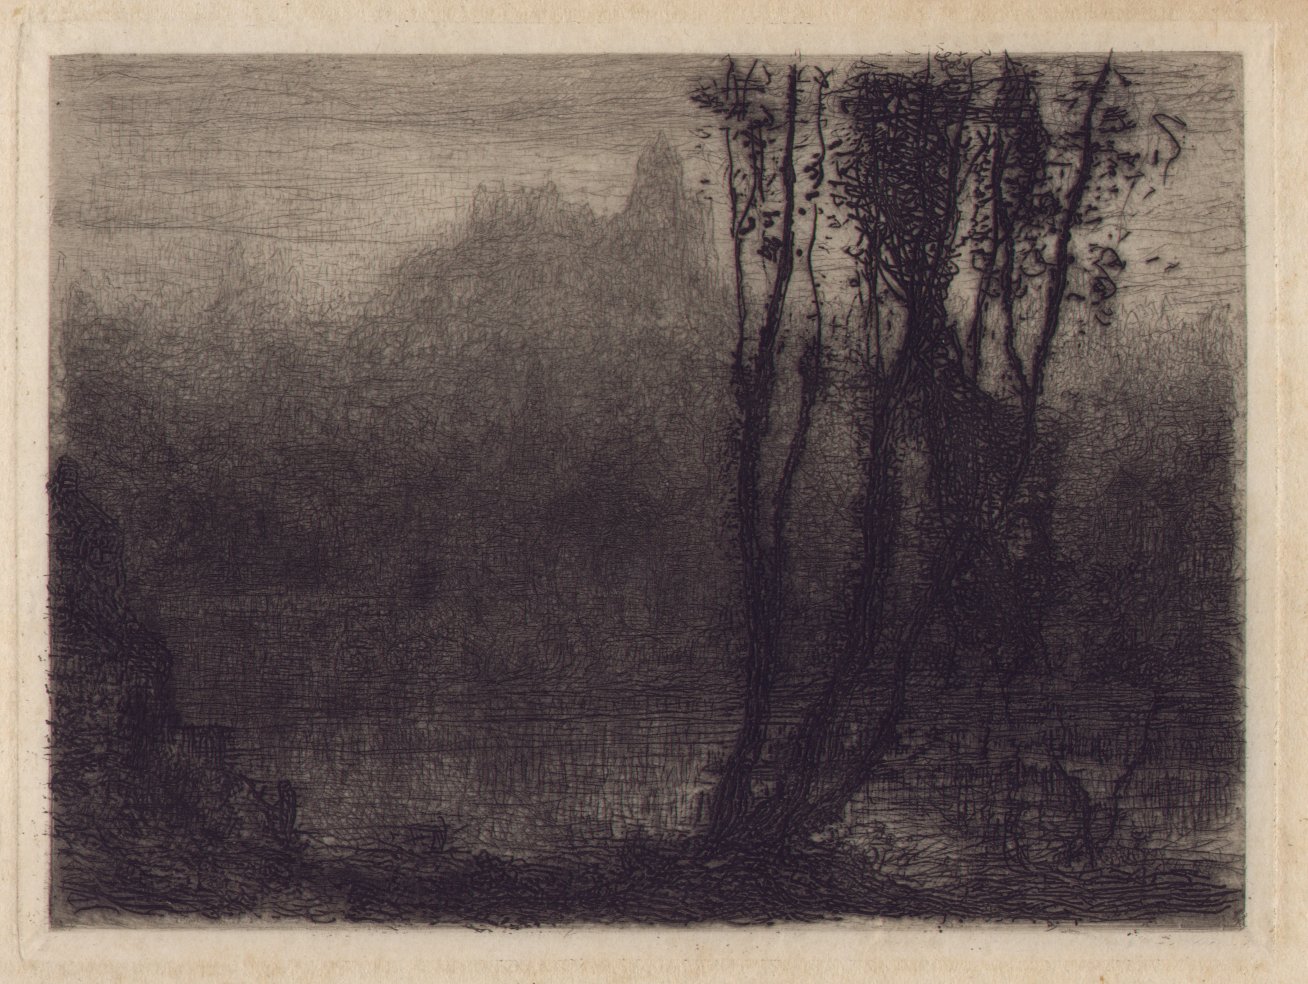 Etching - (Impressionistic river scene with trees)